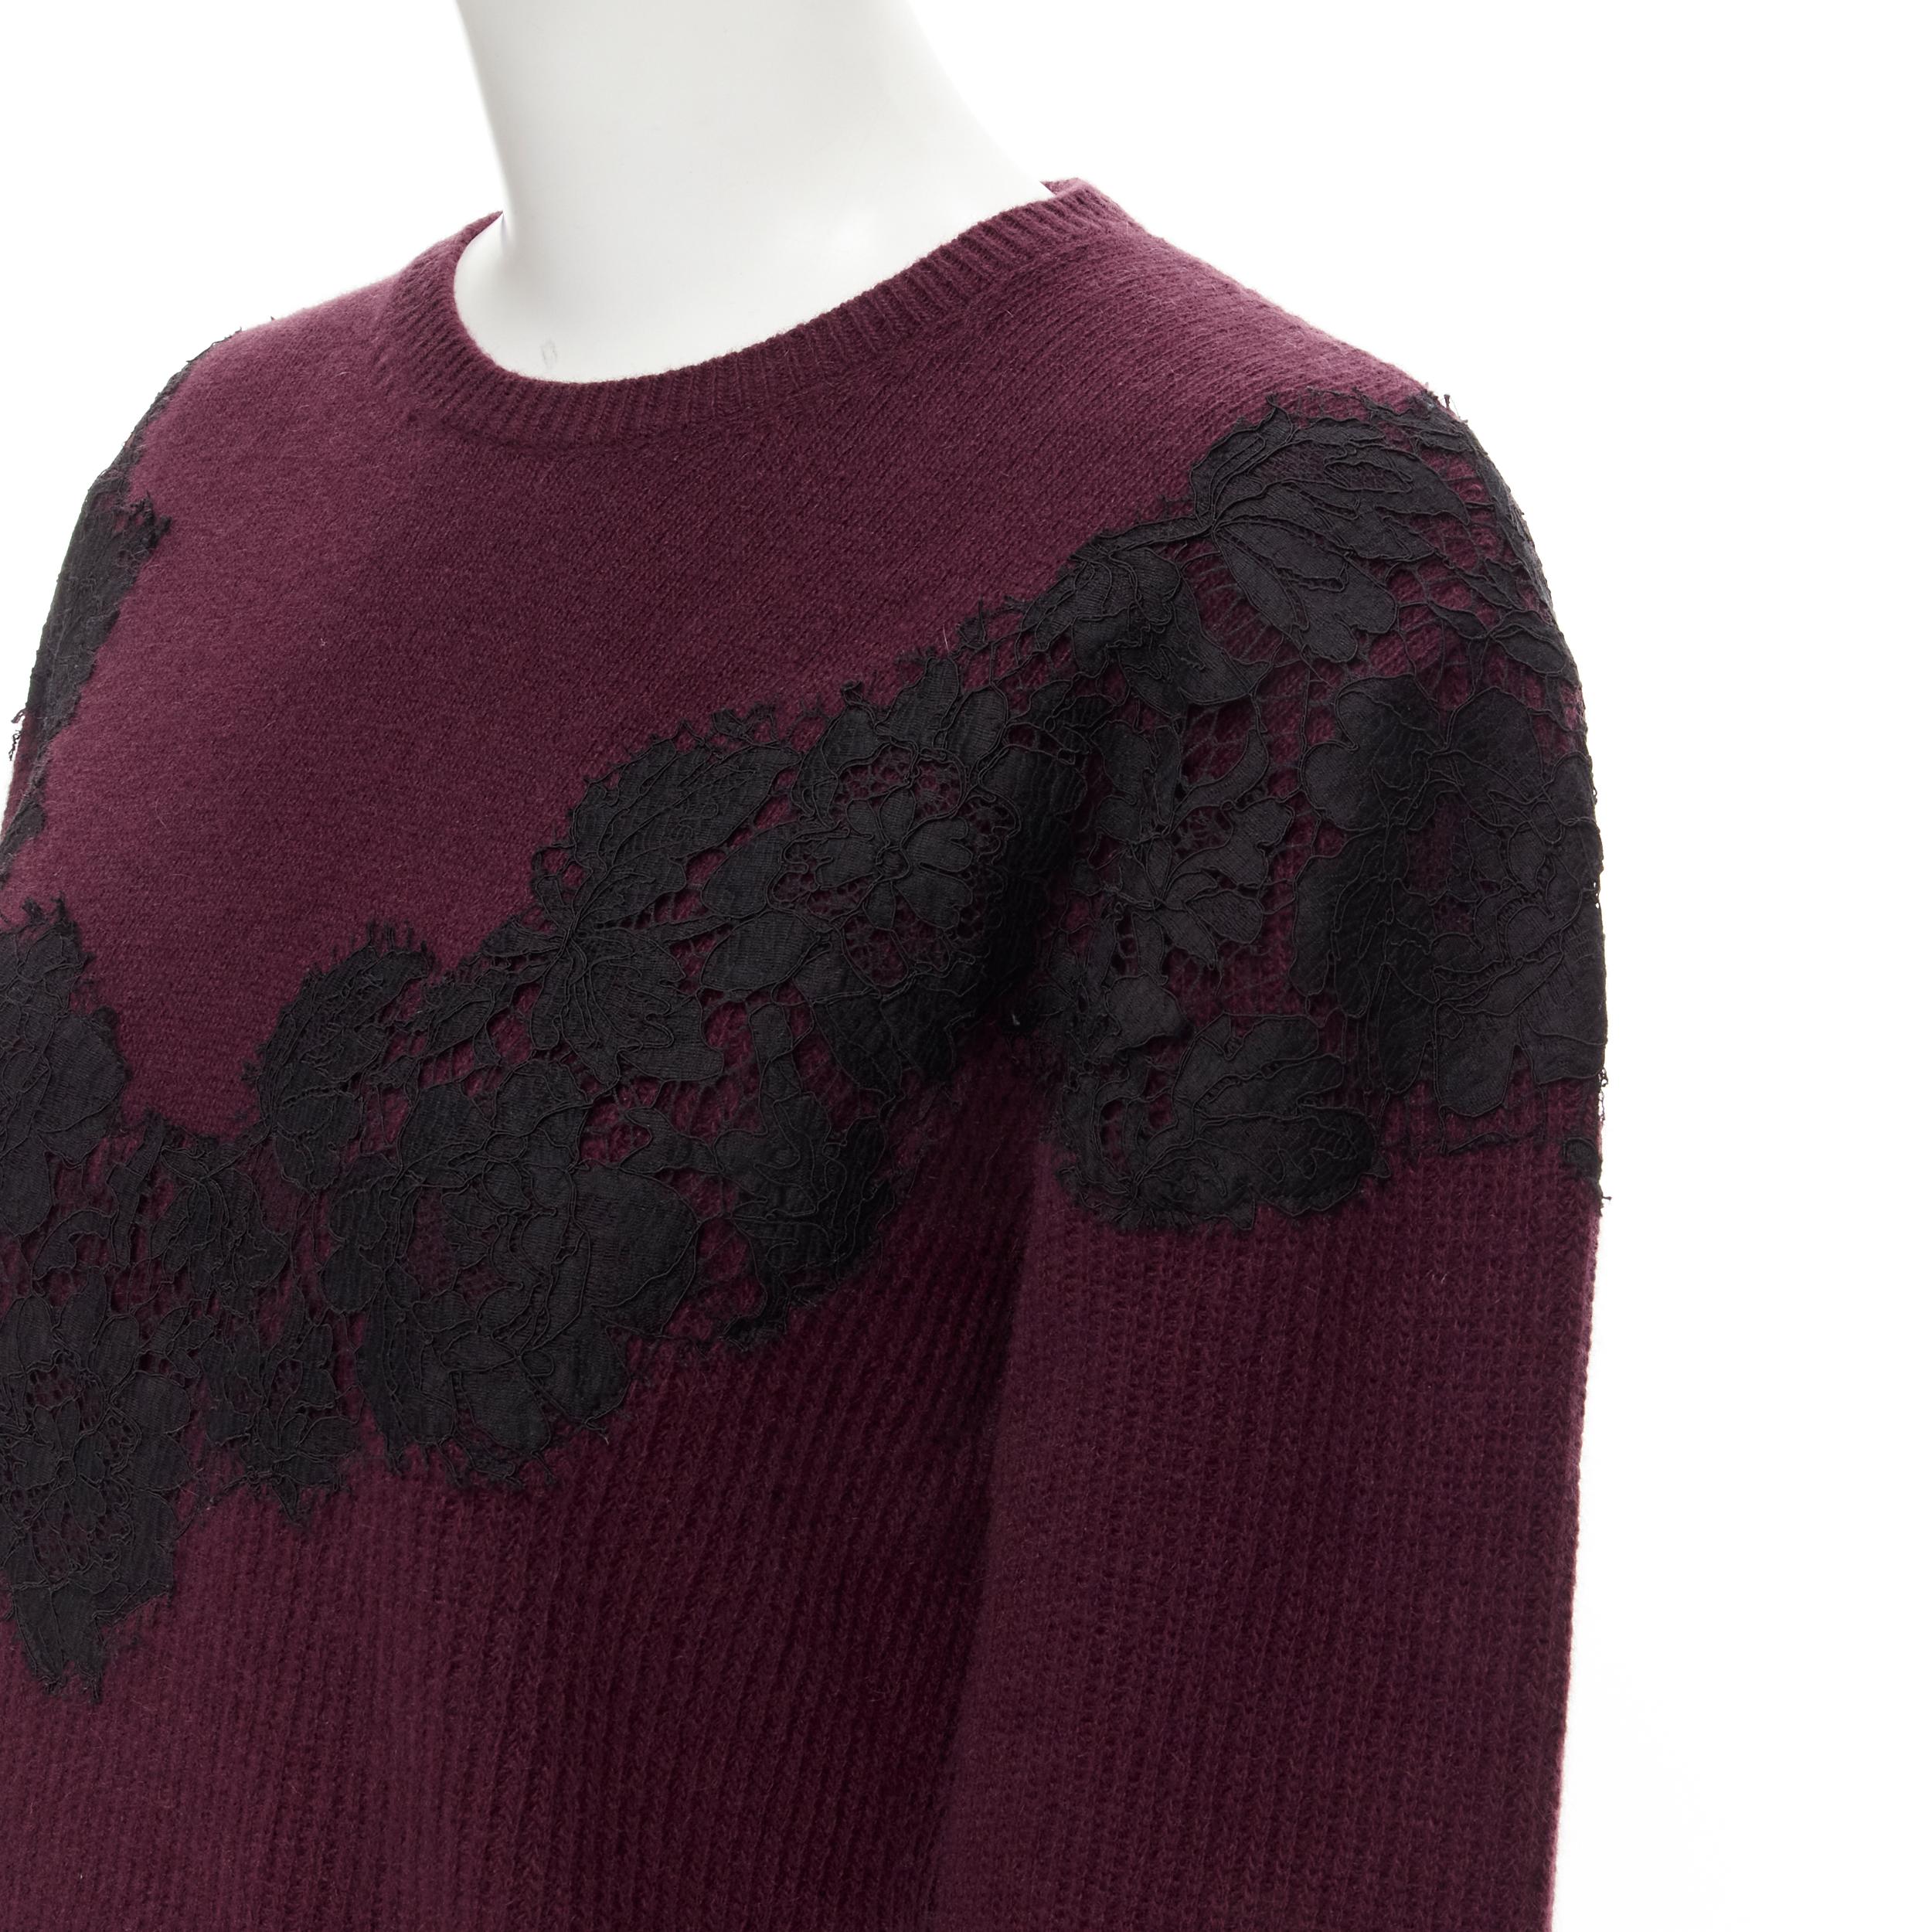 VALENTINO burgundy red virgin wool cashmere black floral lace applique sweater XL 
Reference: MELK/A00044 
Brand: Valentino 
Material: Virgin wool 
Color: Burgundy 
Pattern: Solid 
Extra Detail: Fine knit at yoke. Black floral lace applique across